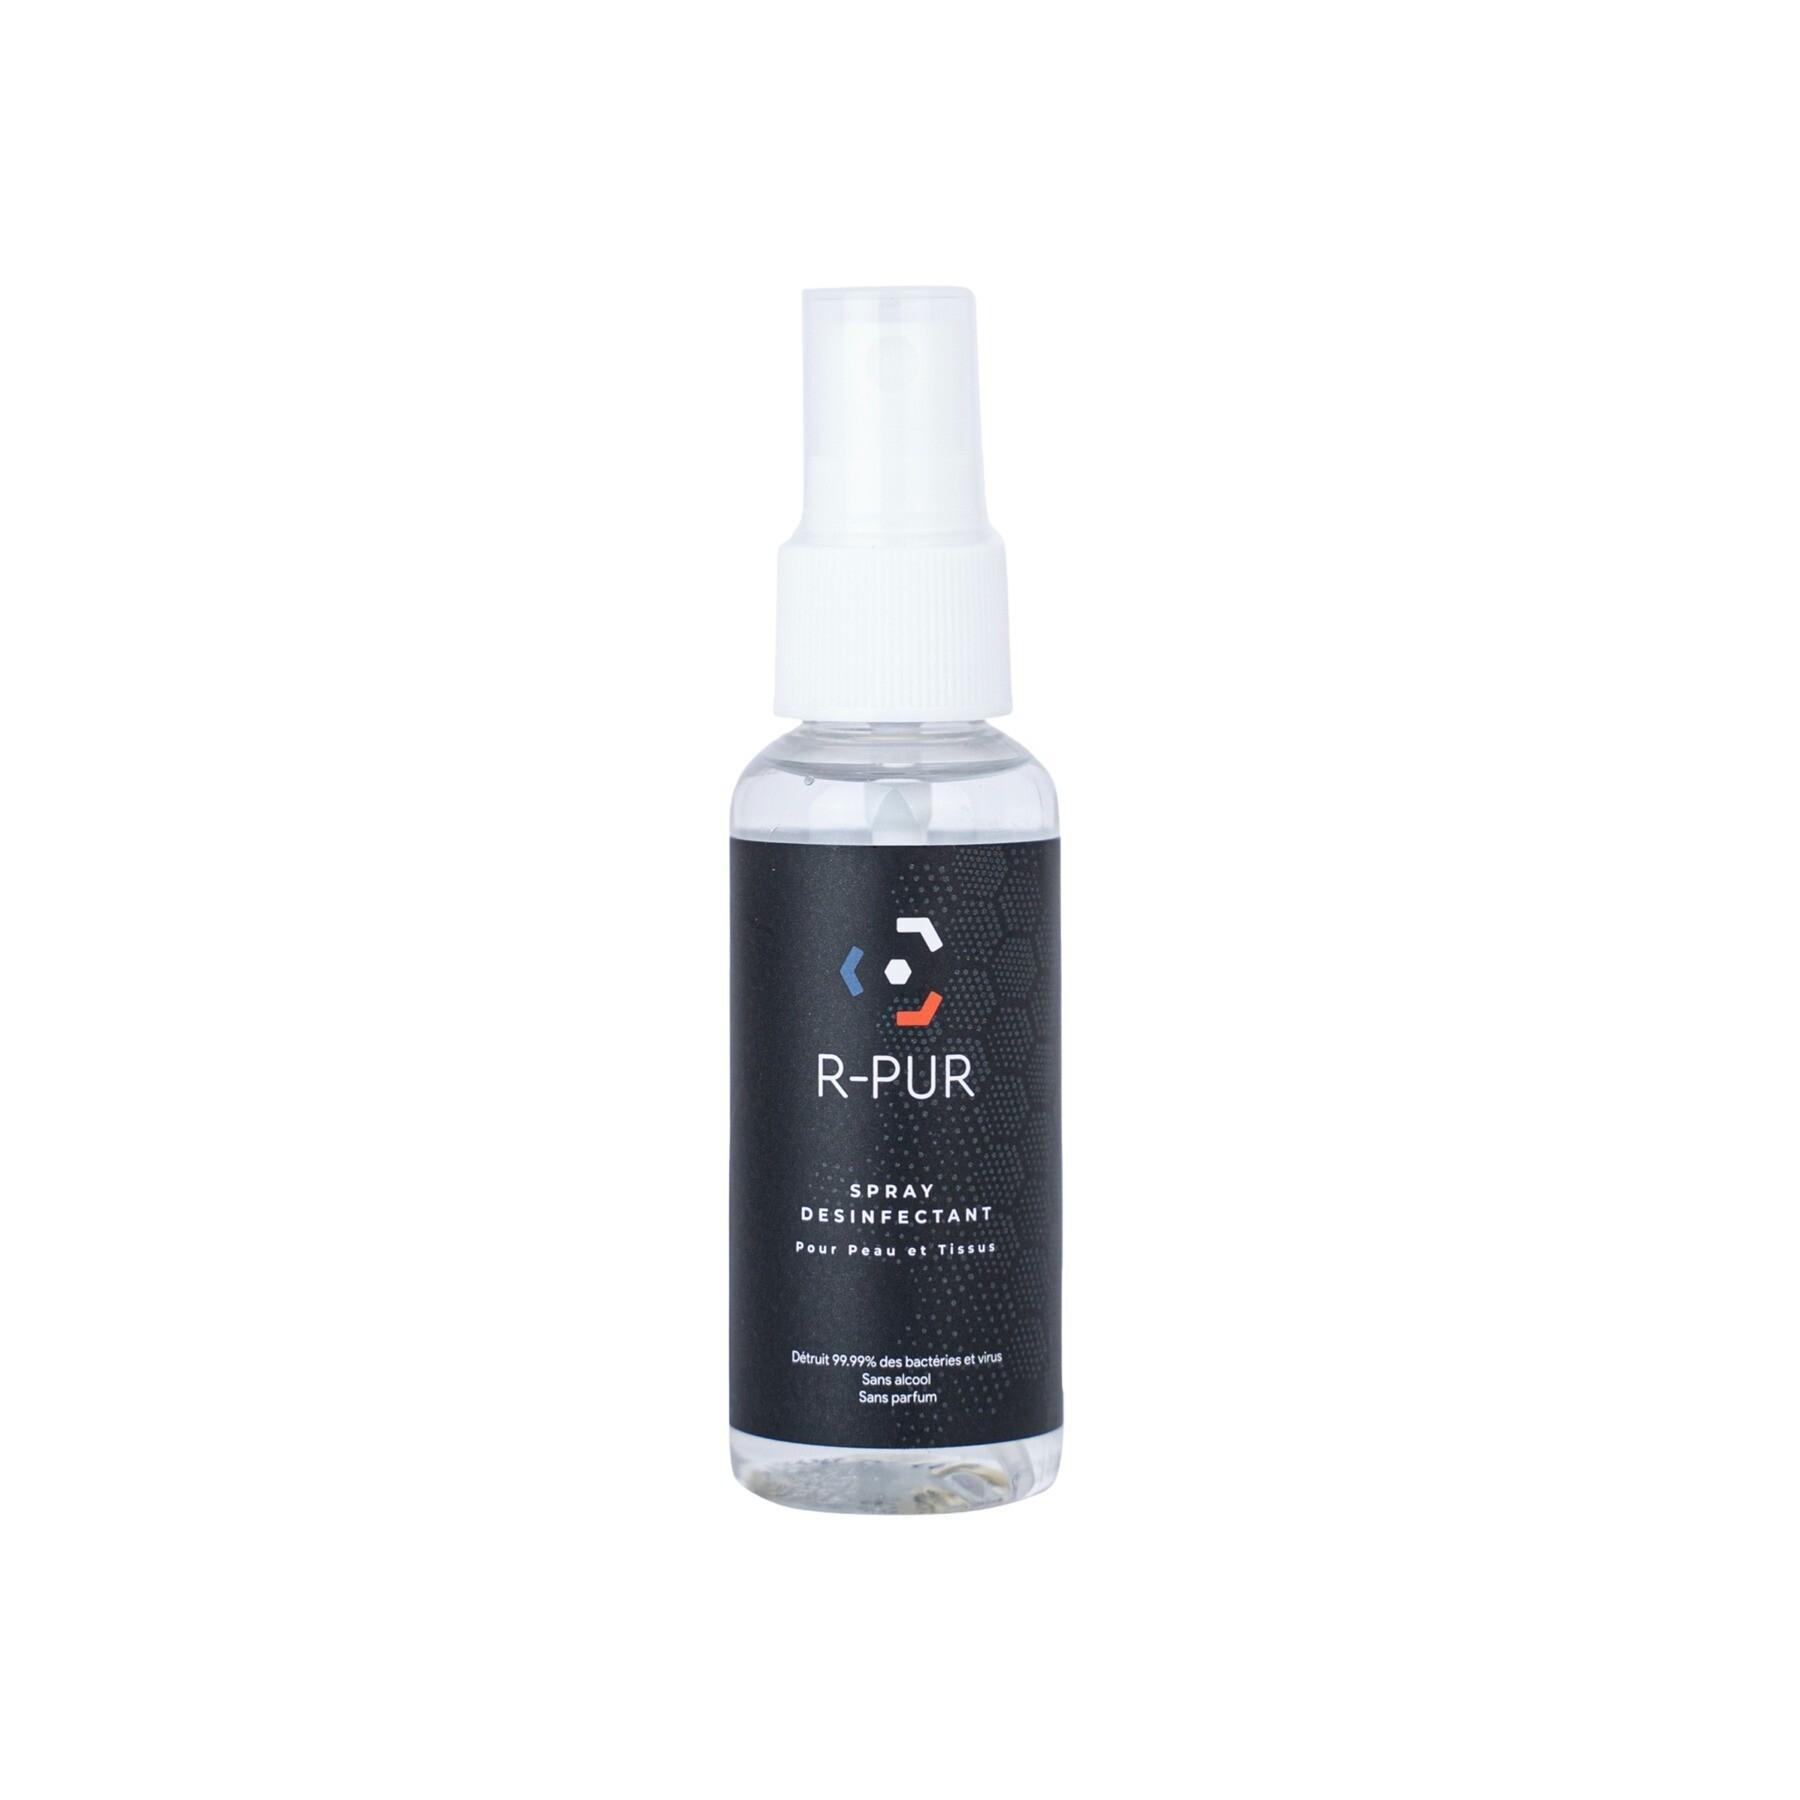 Mask cleaning spray R-PUR